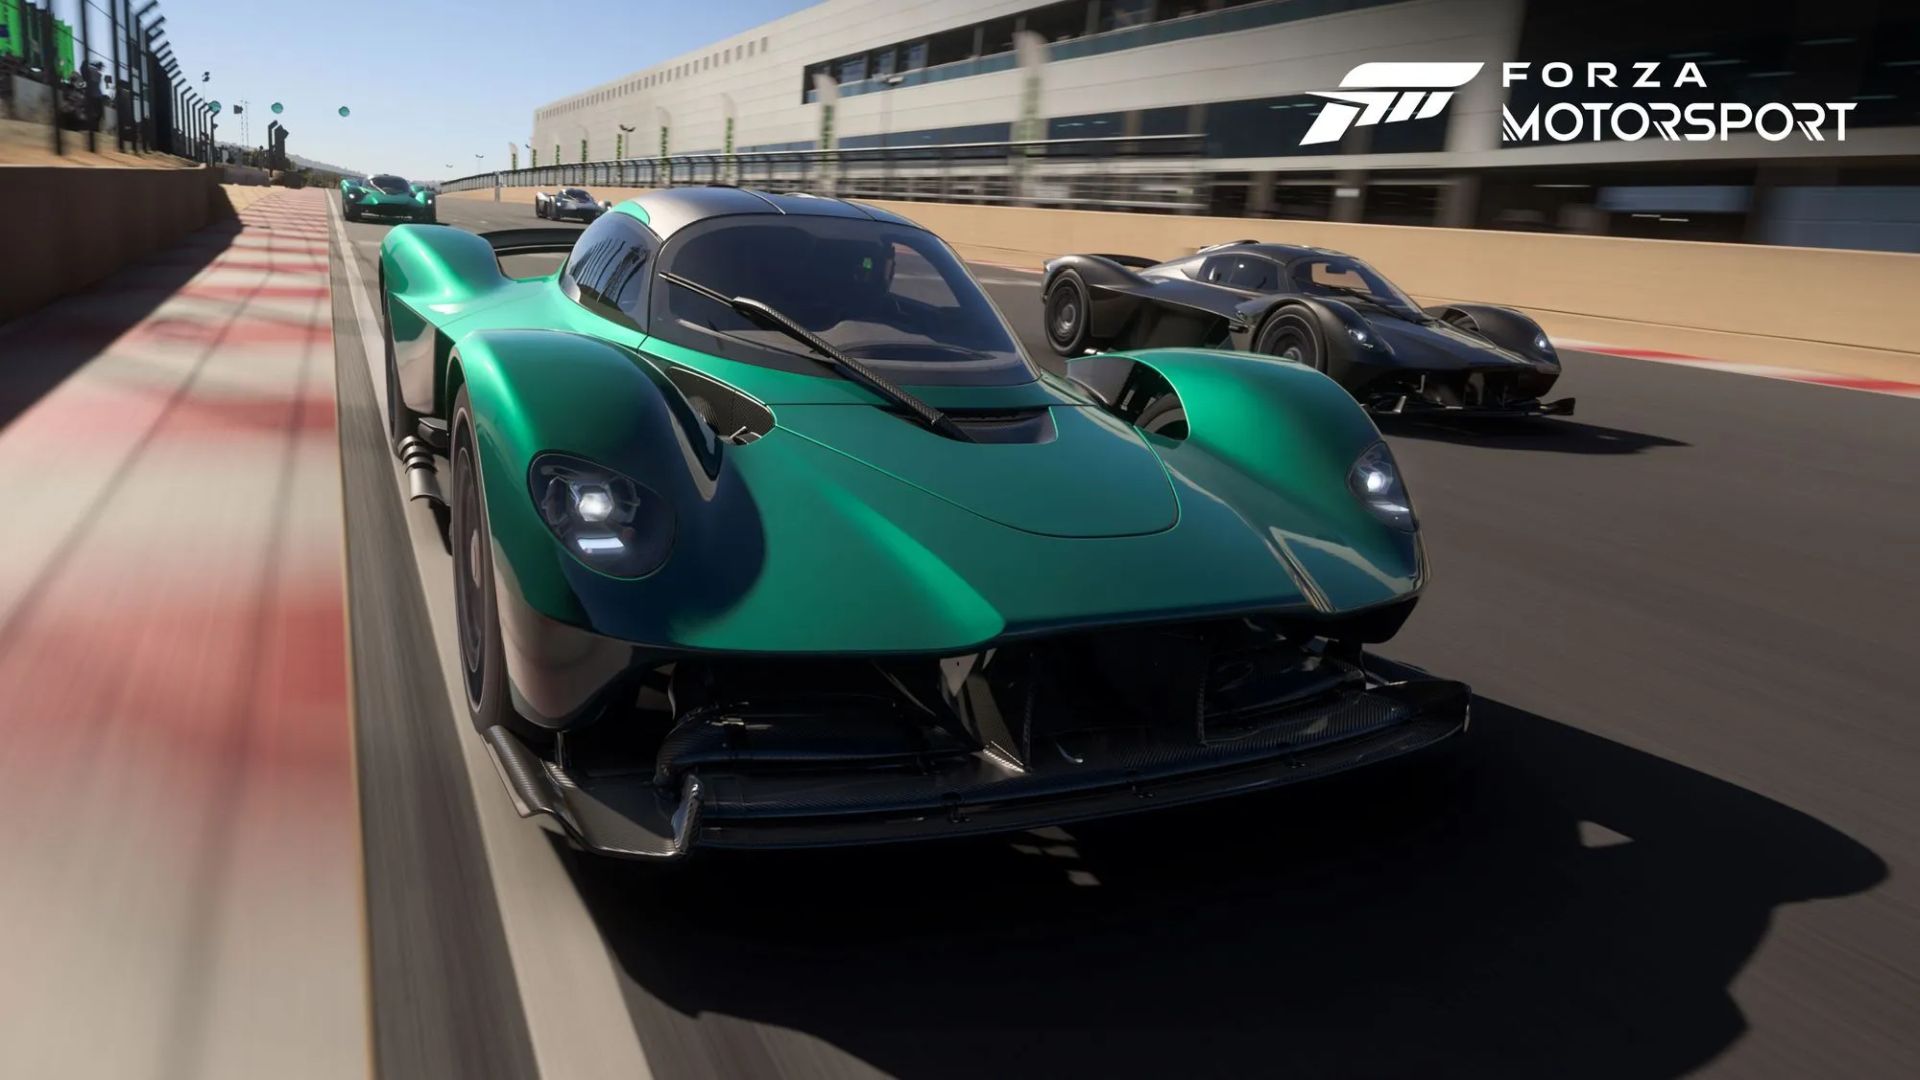 Forza Motorsport Car Progression Changes Coming in March